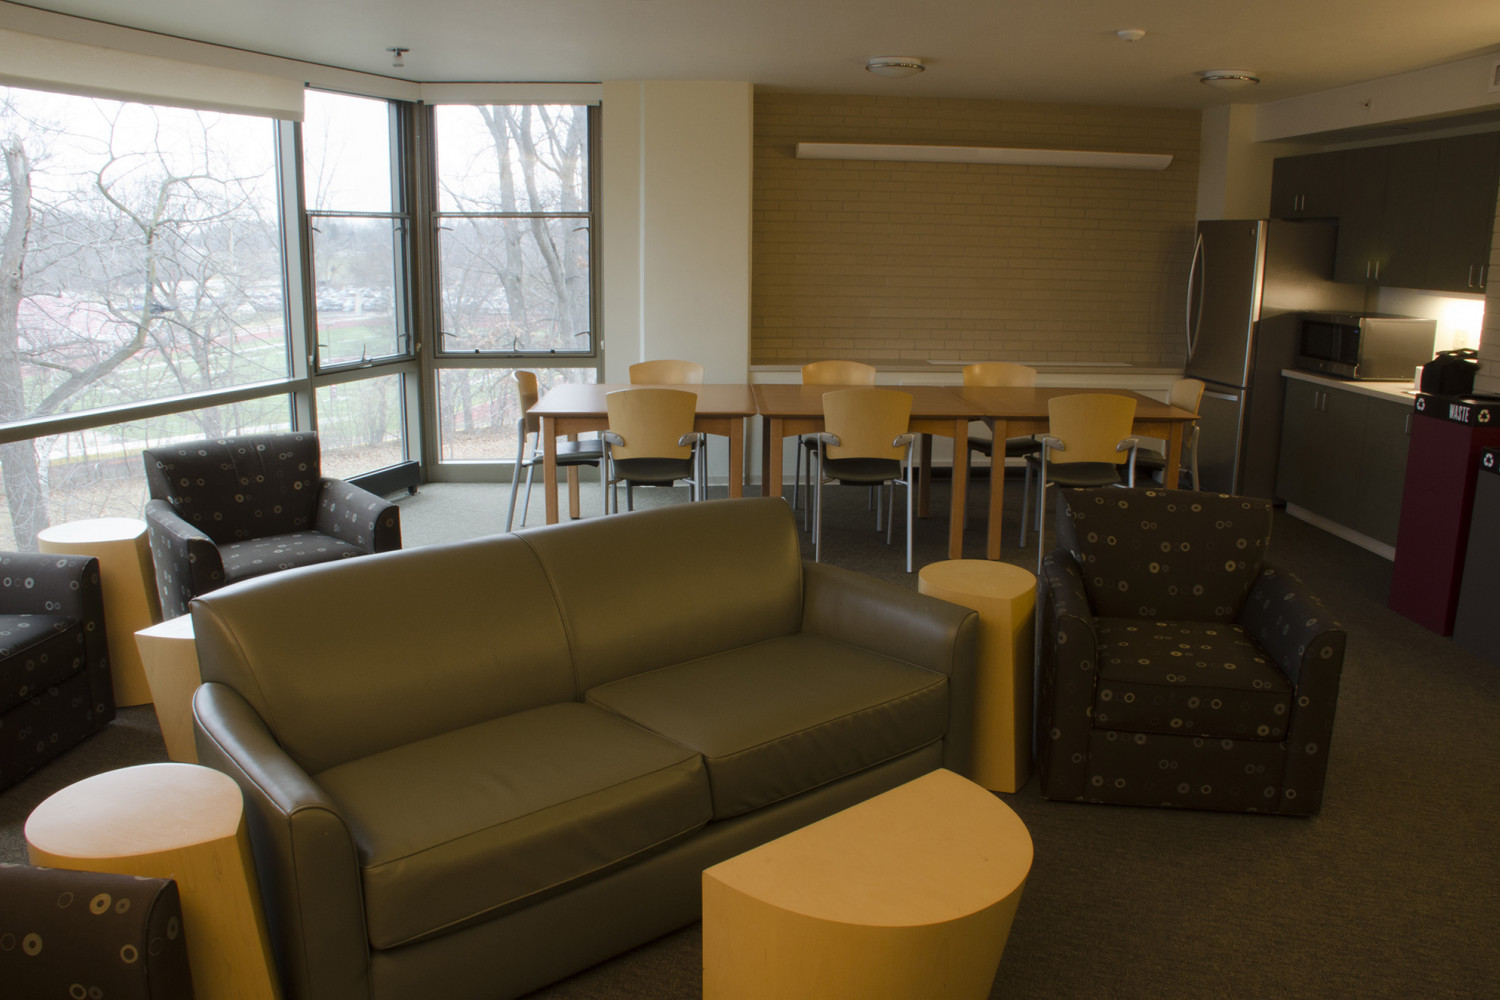 The Oaks offer communal lounge spaces located on each floor and dedicated study spaces in the bas...